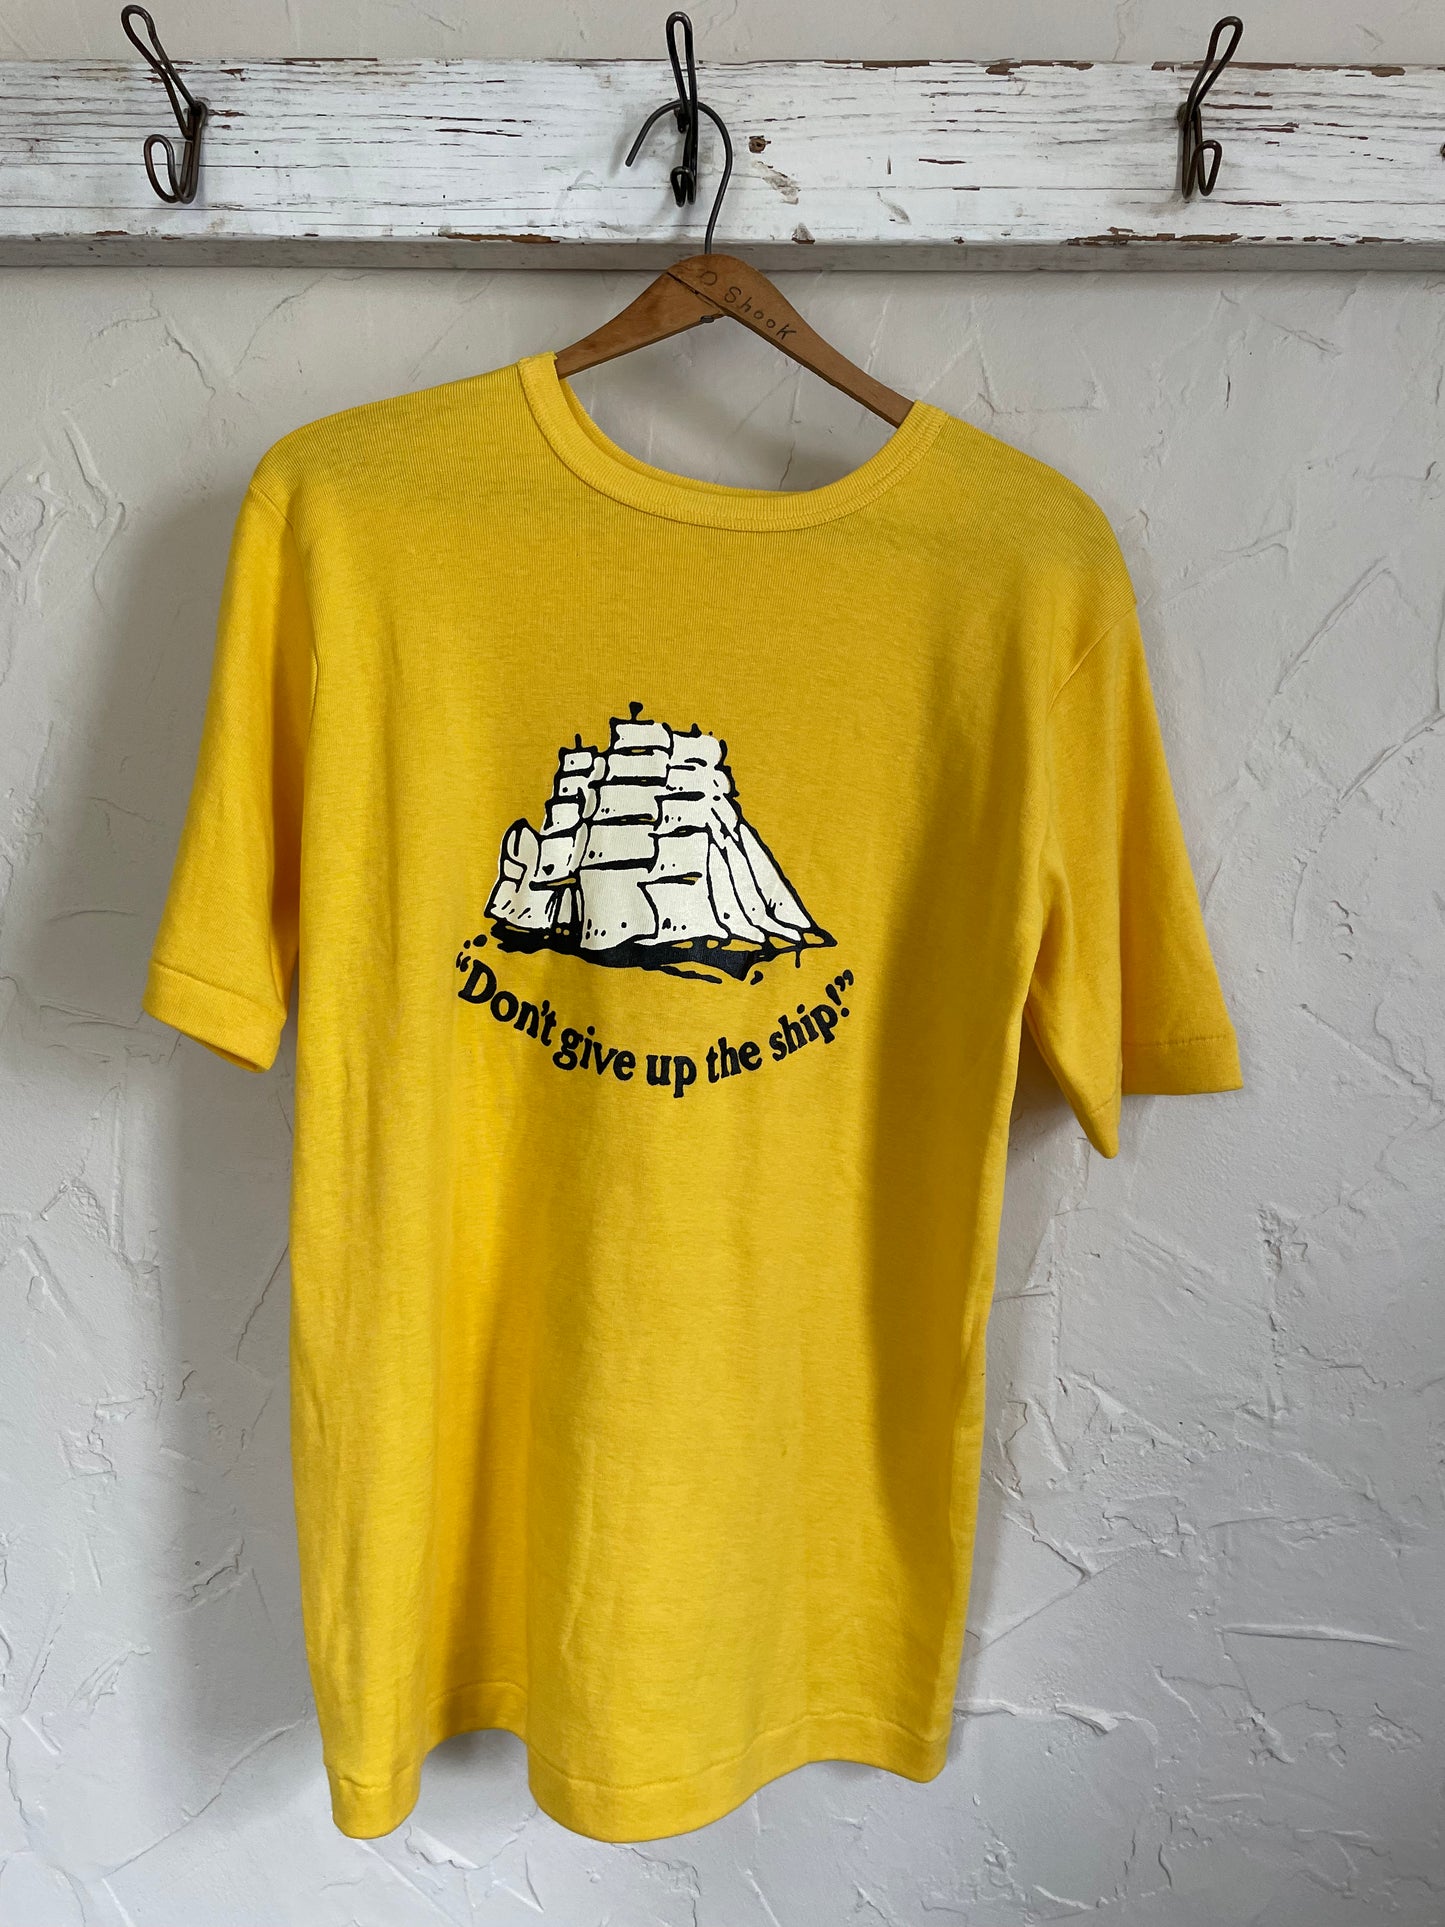 70s Cutty Sark “Don’t give up the ship” Tee